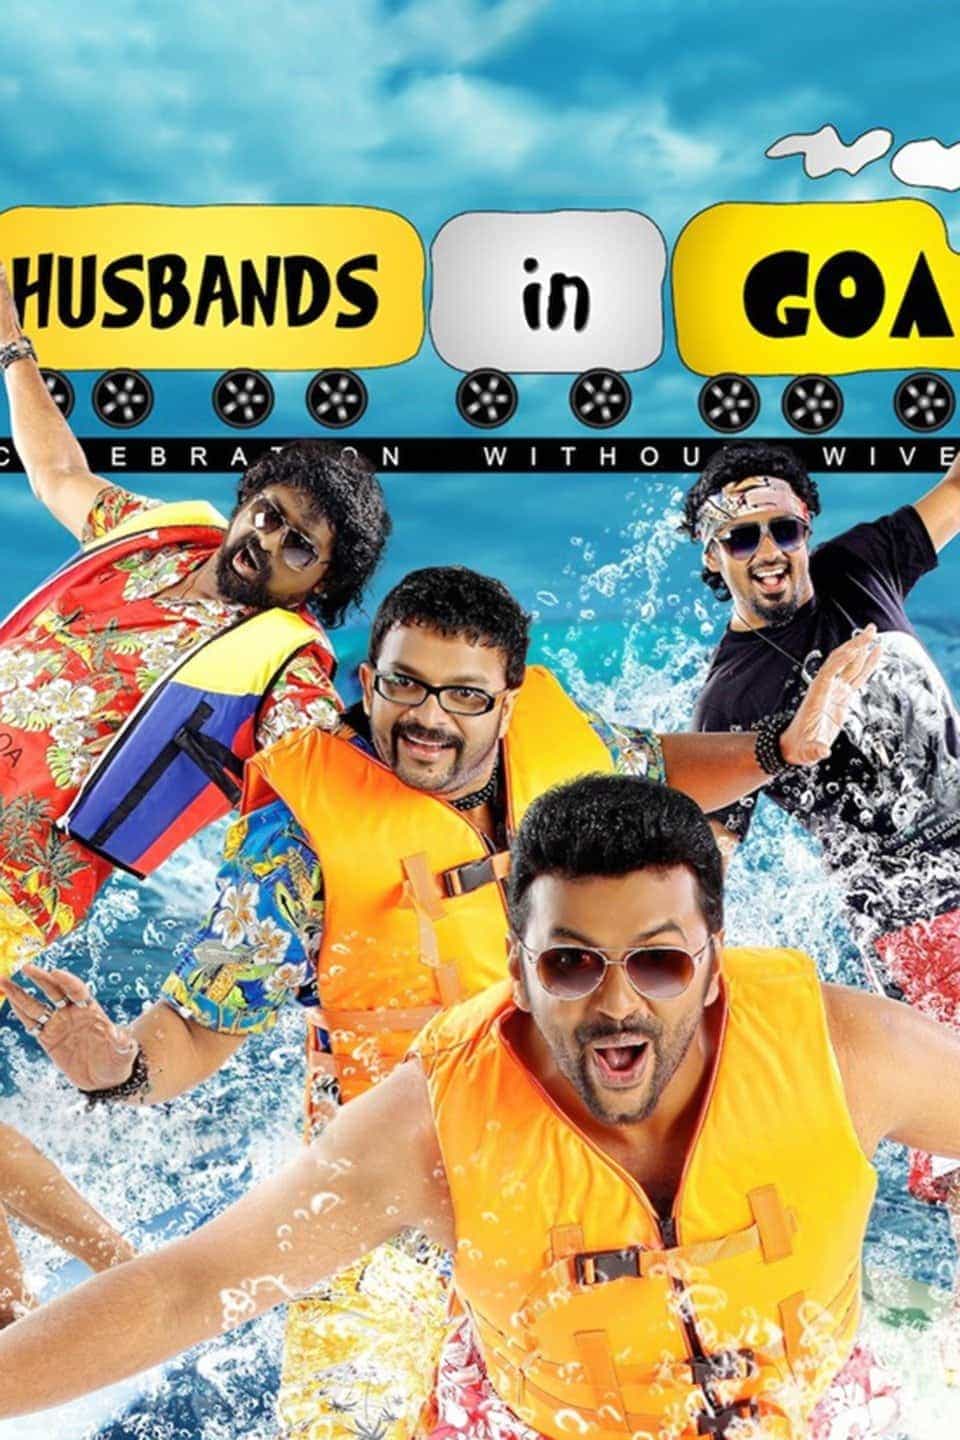 Husbands In Goa: Celebration Without Wives